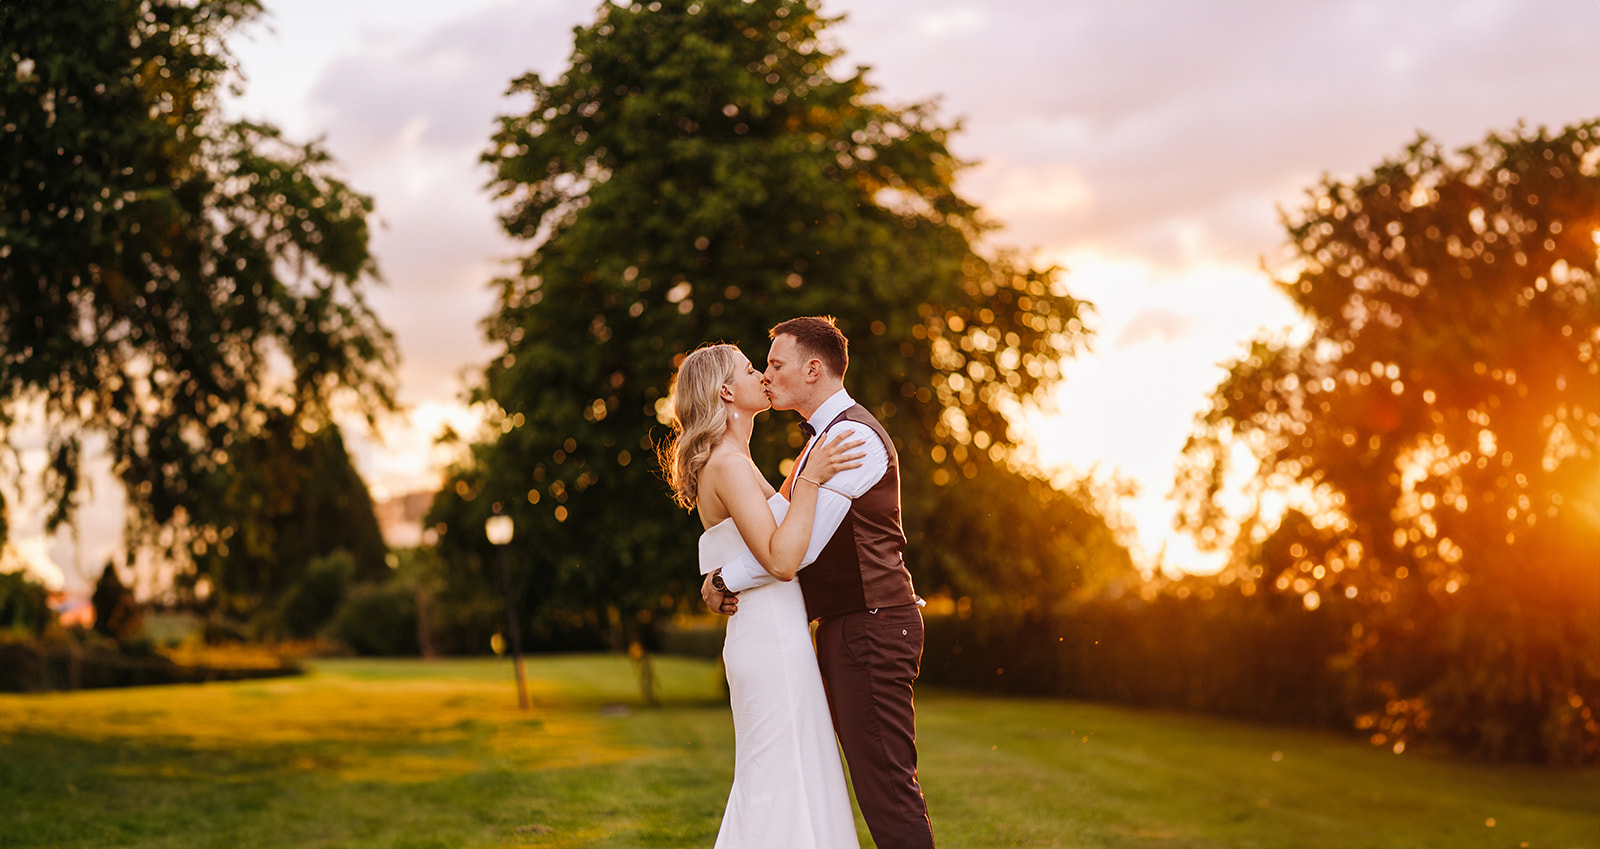 Bride and groom kiss in castle durrow grounds with sunset behind them